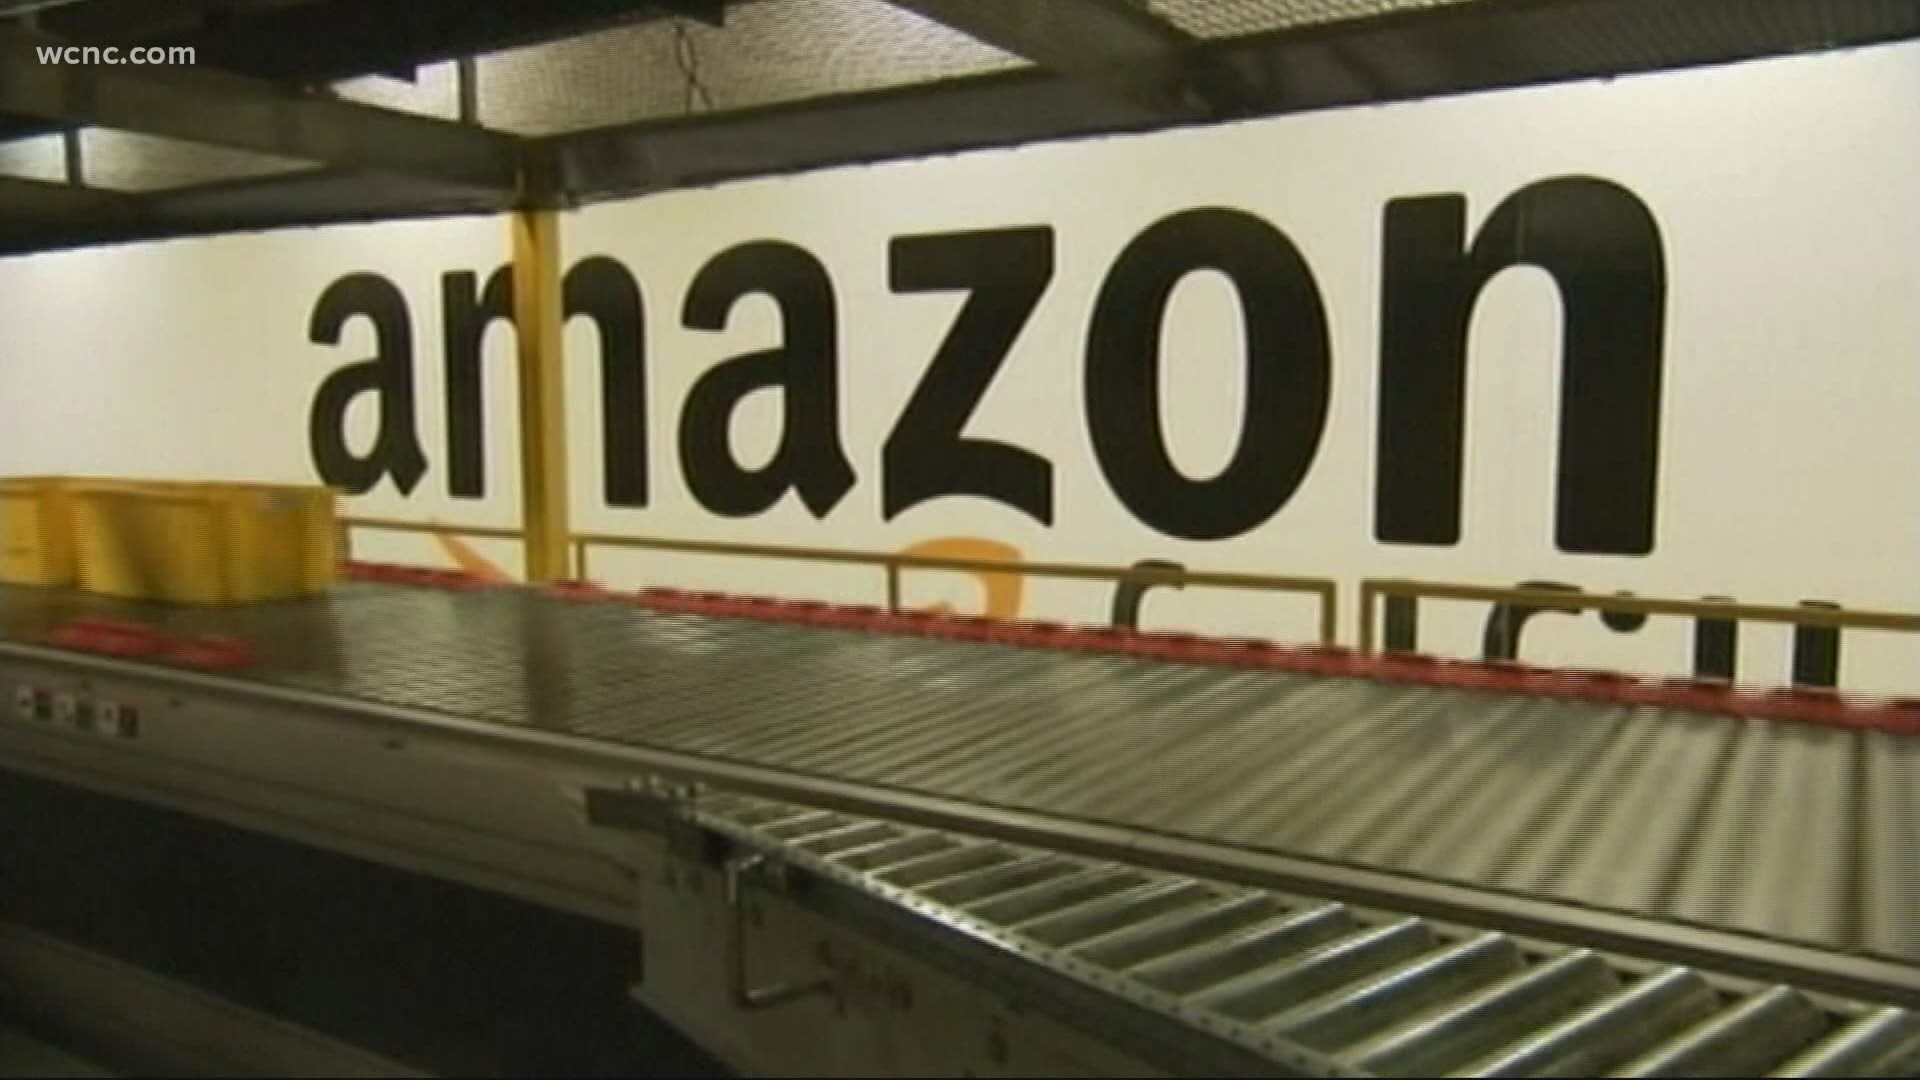 Amazon currently operates 8 fulfillment centers in North Carolina, including two in Charlotte. The online retailer promises to provide hundreds of new jobs.